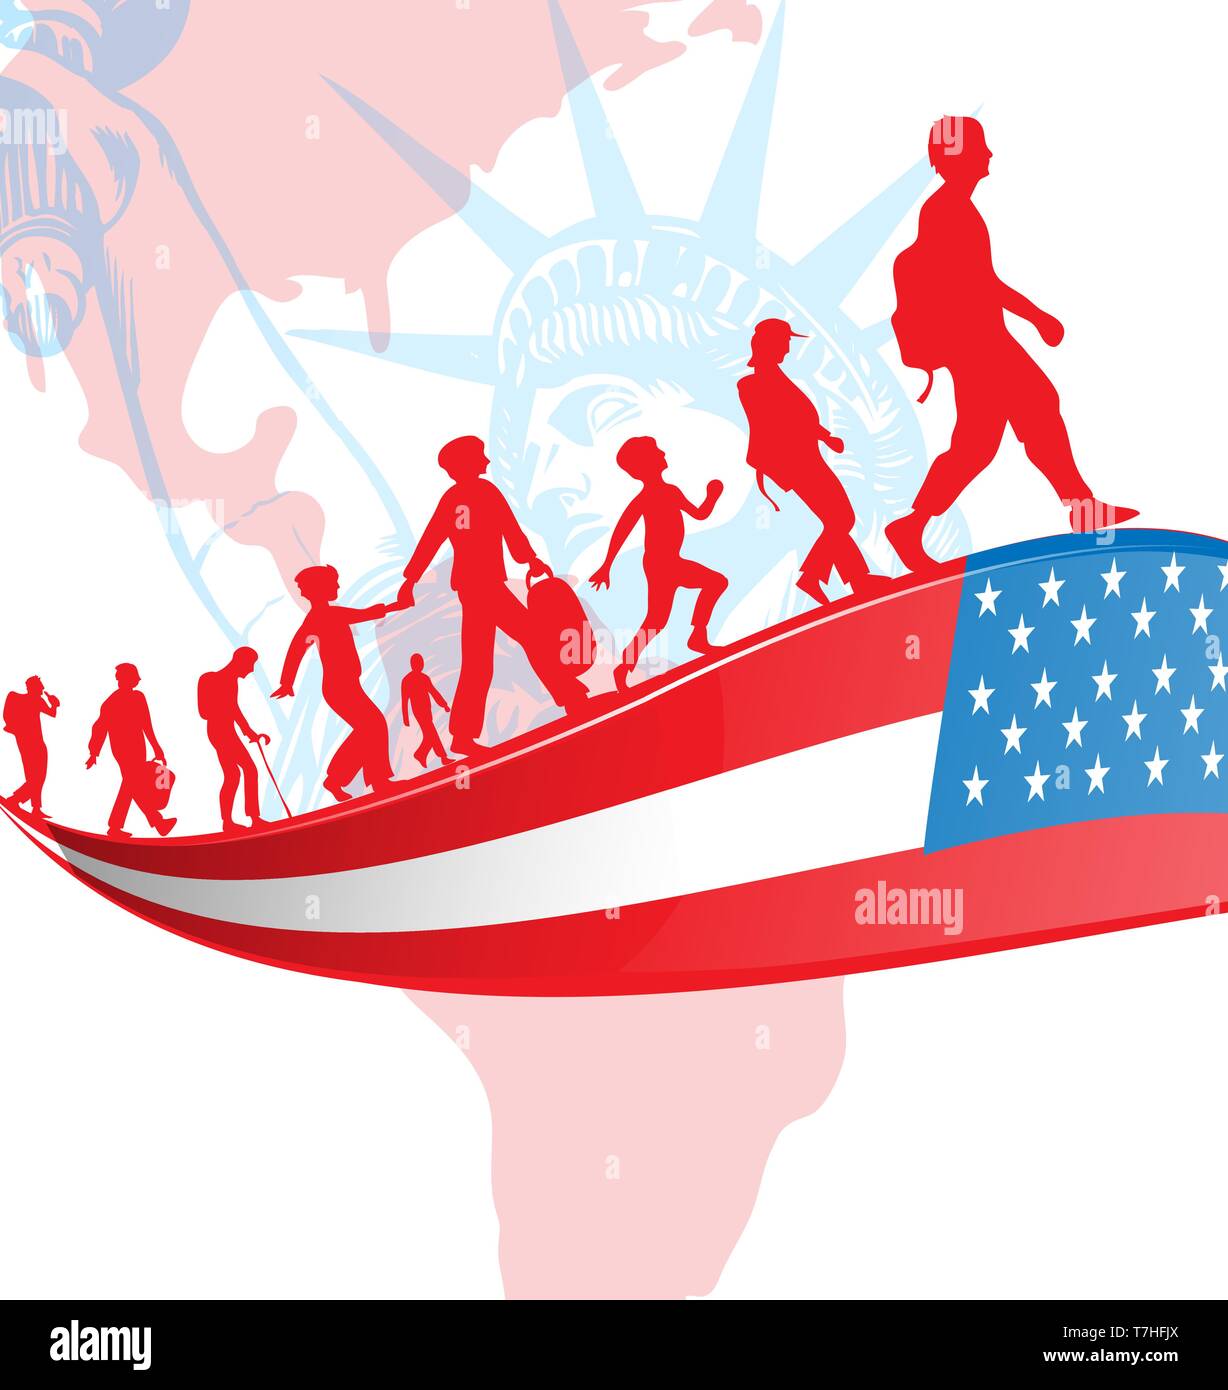 USA flag with immigration people on american map.illustration Stock Vector